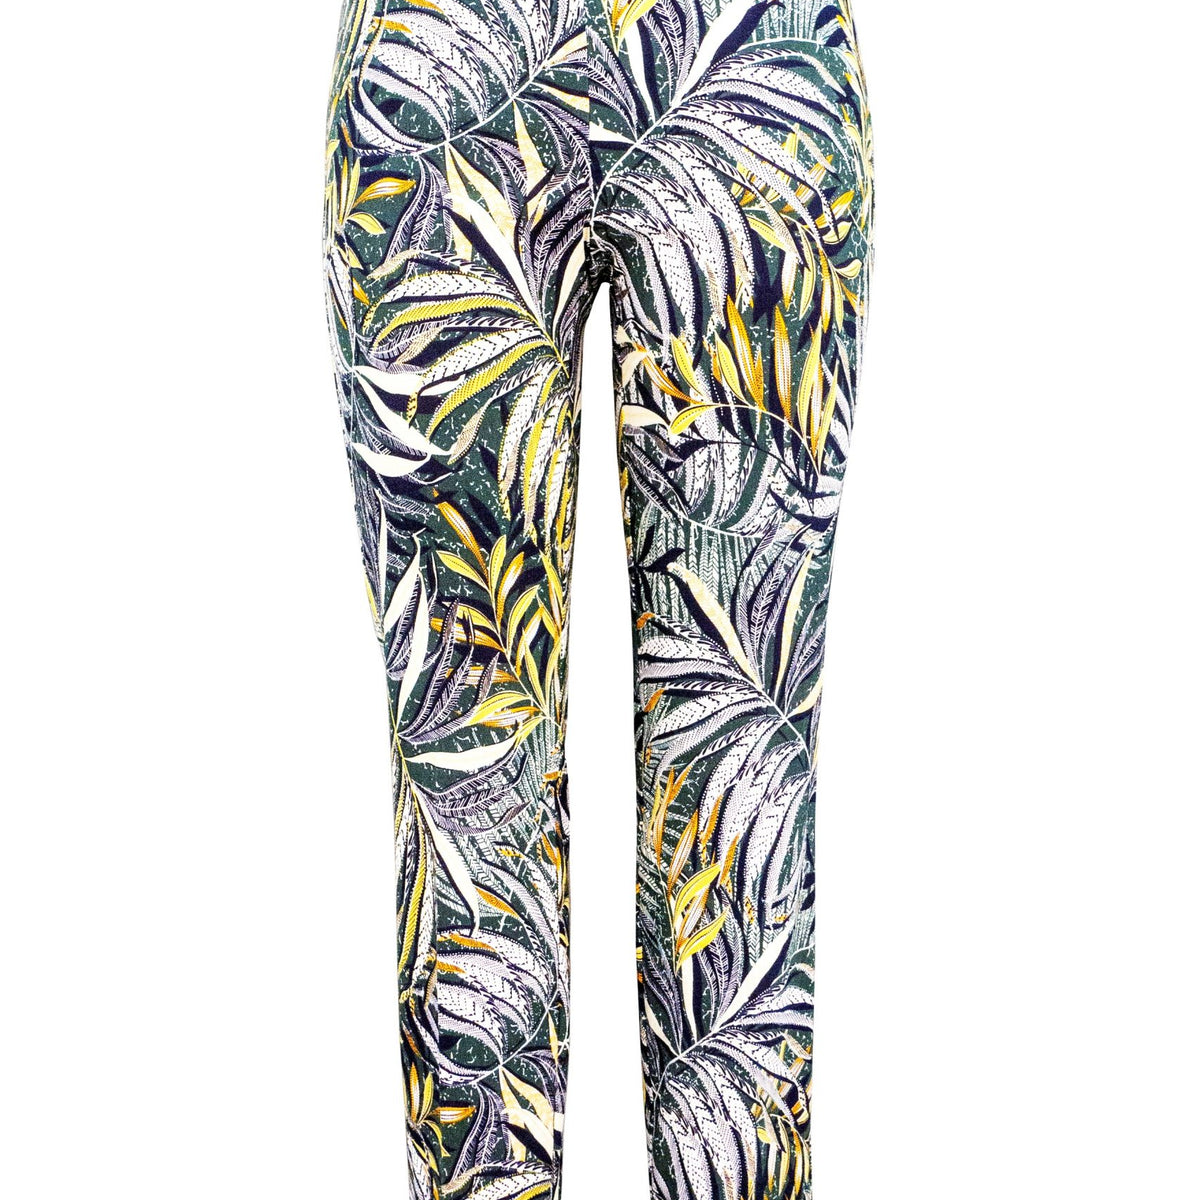 UP! Pants Women's Petal Slit Pant With THE THIN CREDIBLE FIT